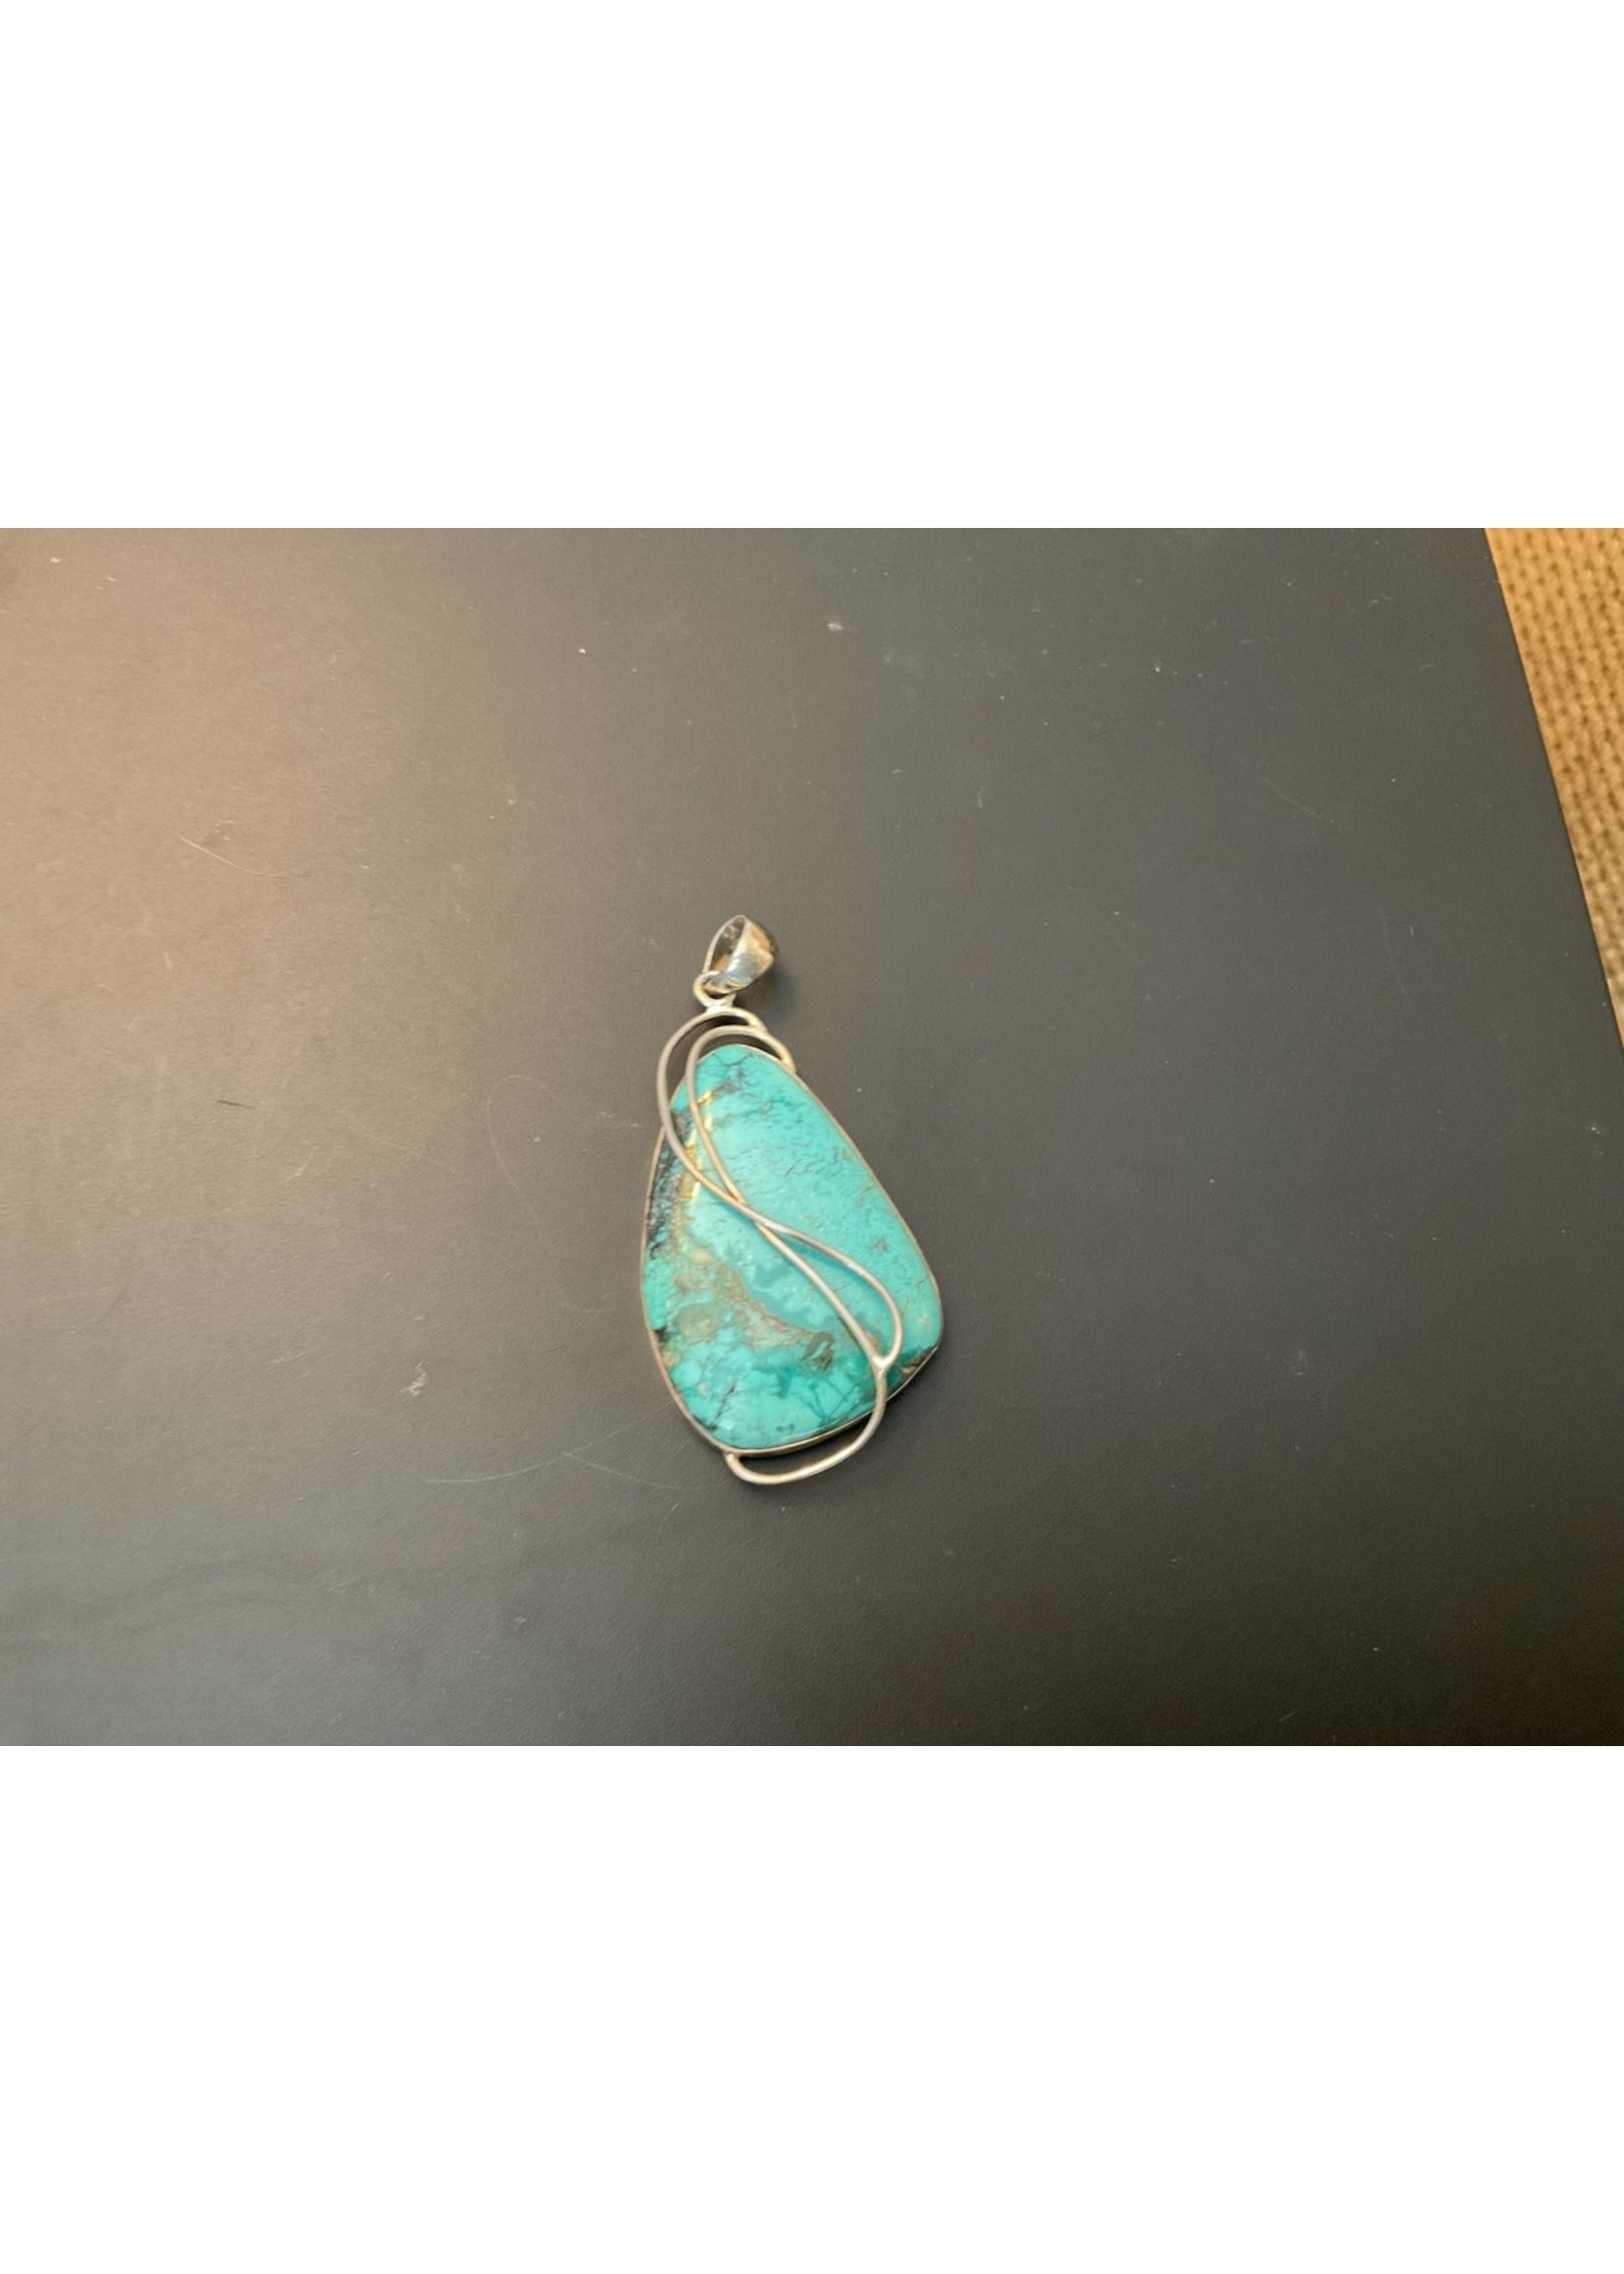 Turquoise Pendant set in Stirling Silver - 2 1/2”